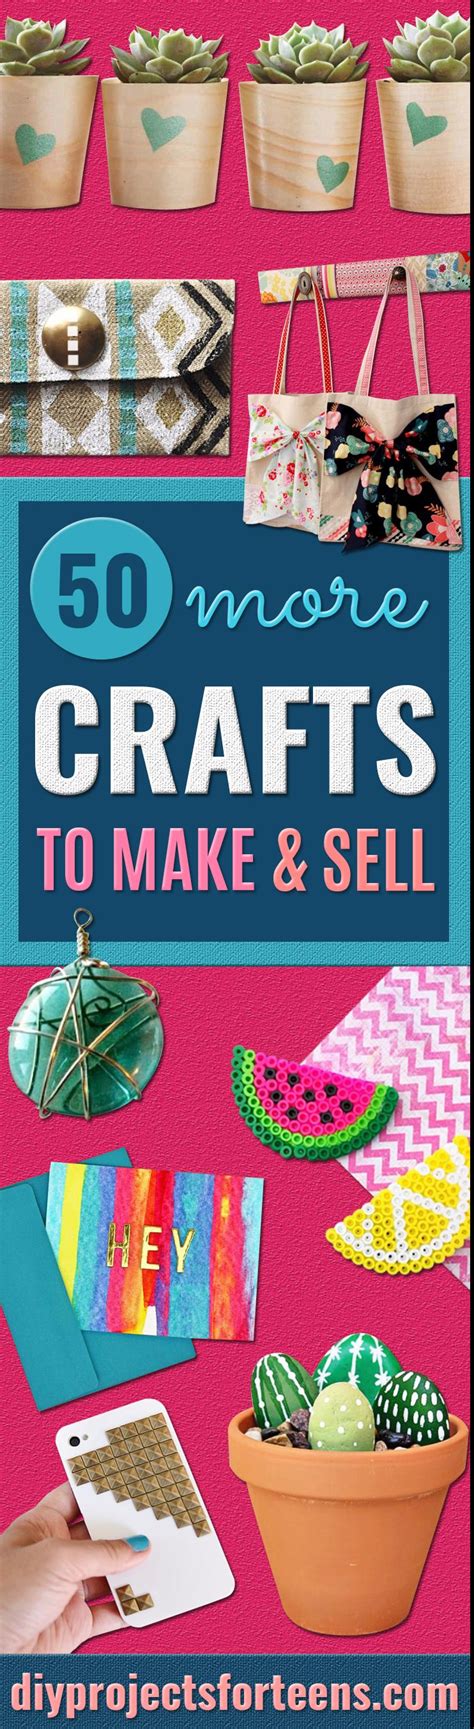 easy crafts    sell  teens diy projects  teens